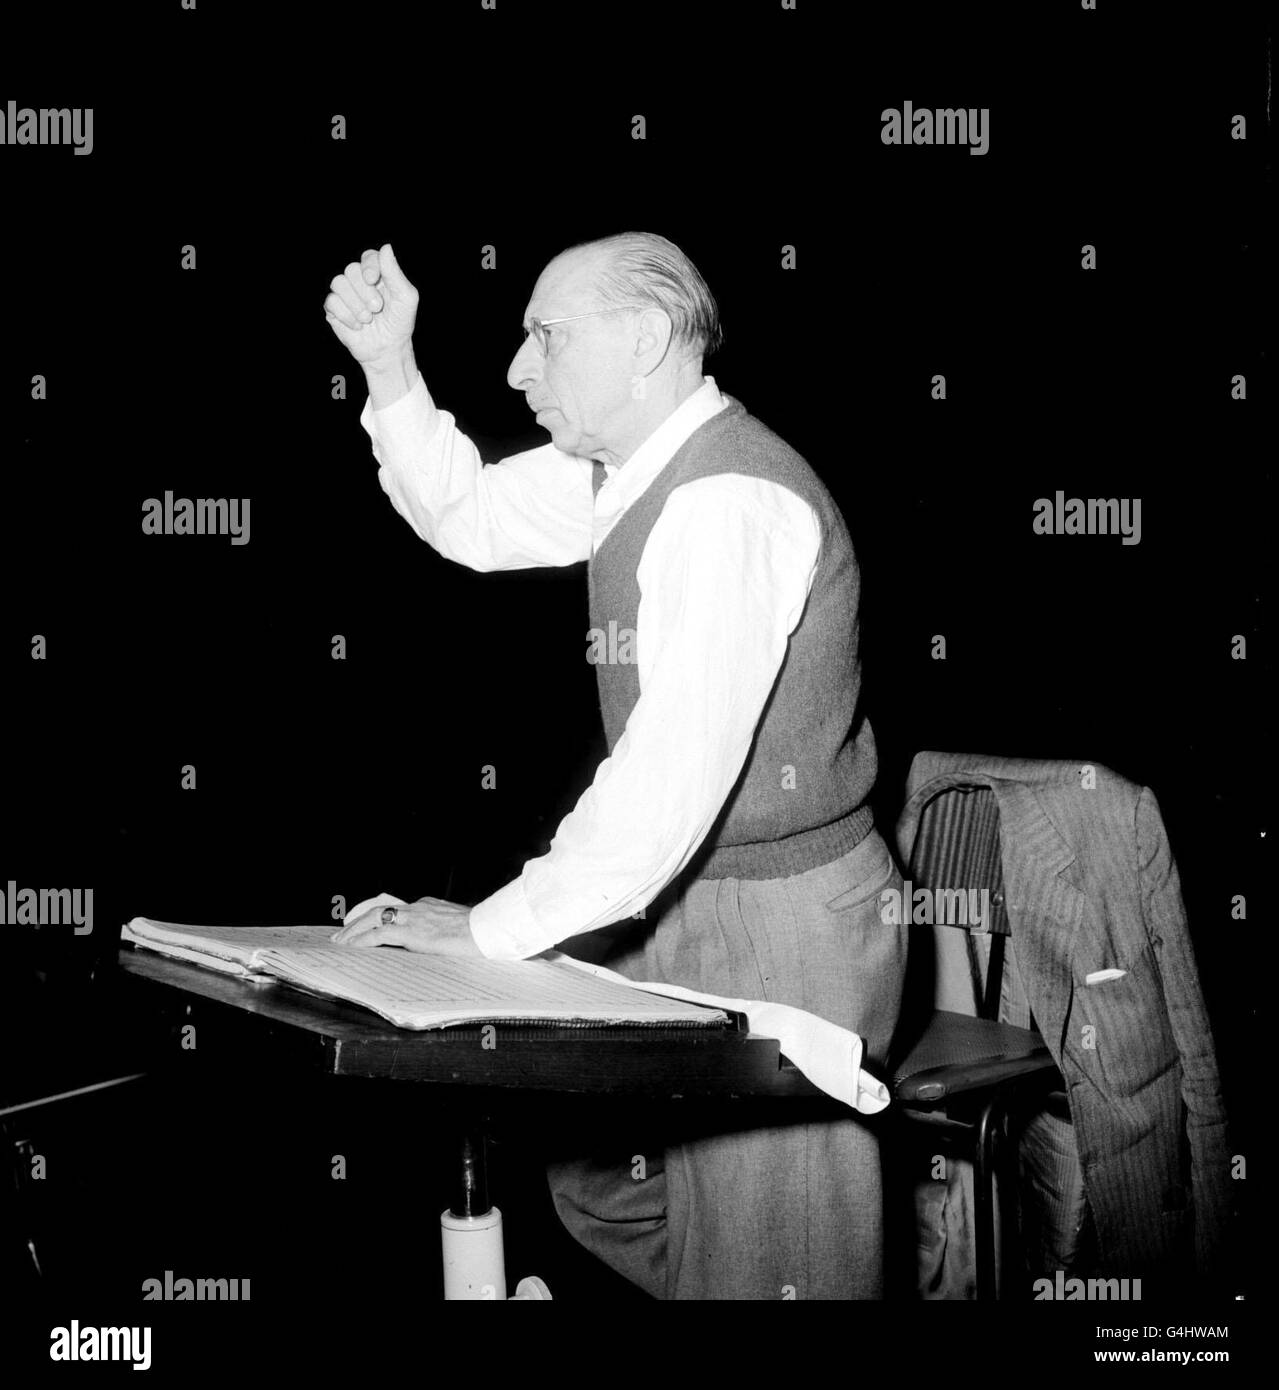 Russian-born composer Igor Stravinsky (1882-1971) rehearsing the Royal Philharmonic Orchestra at the Royal Festival Hall in London, for concert of his own works. Stock Photo